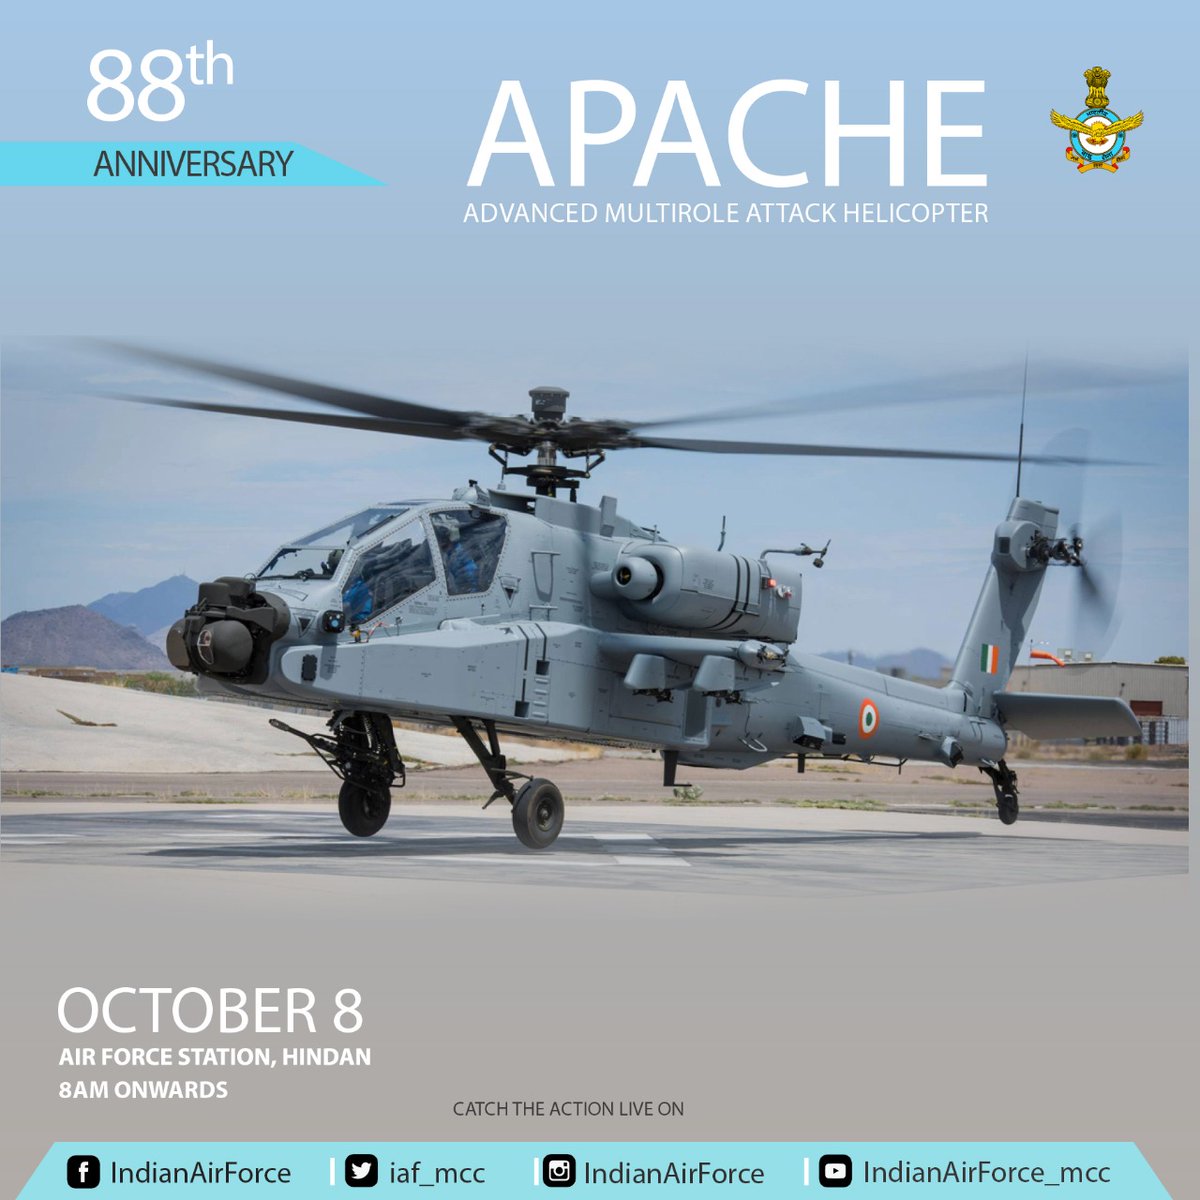 #AFDay2020: AH-64E Apache - The Apache is a twin-turbo shaft attack helicopter with a tandem cockpit for two crew & a tail wheel-type landing gear arrangement.
#KnowTheIAF
#IndianAirForce